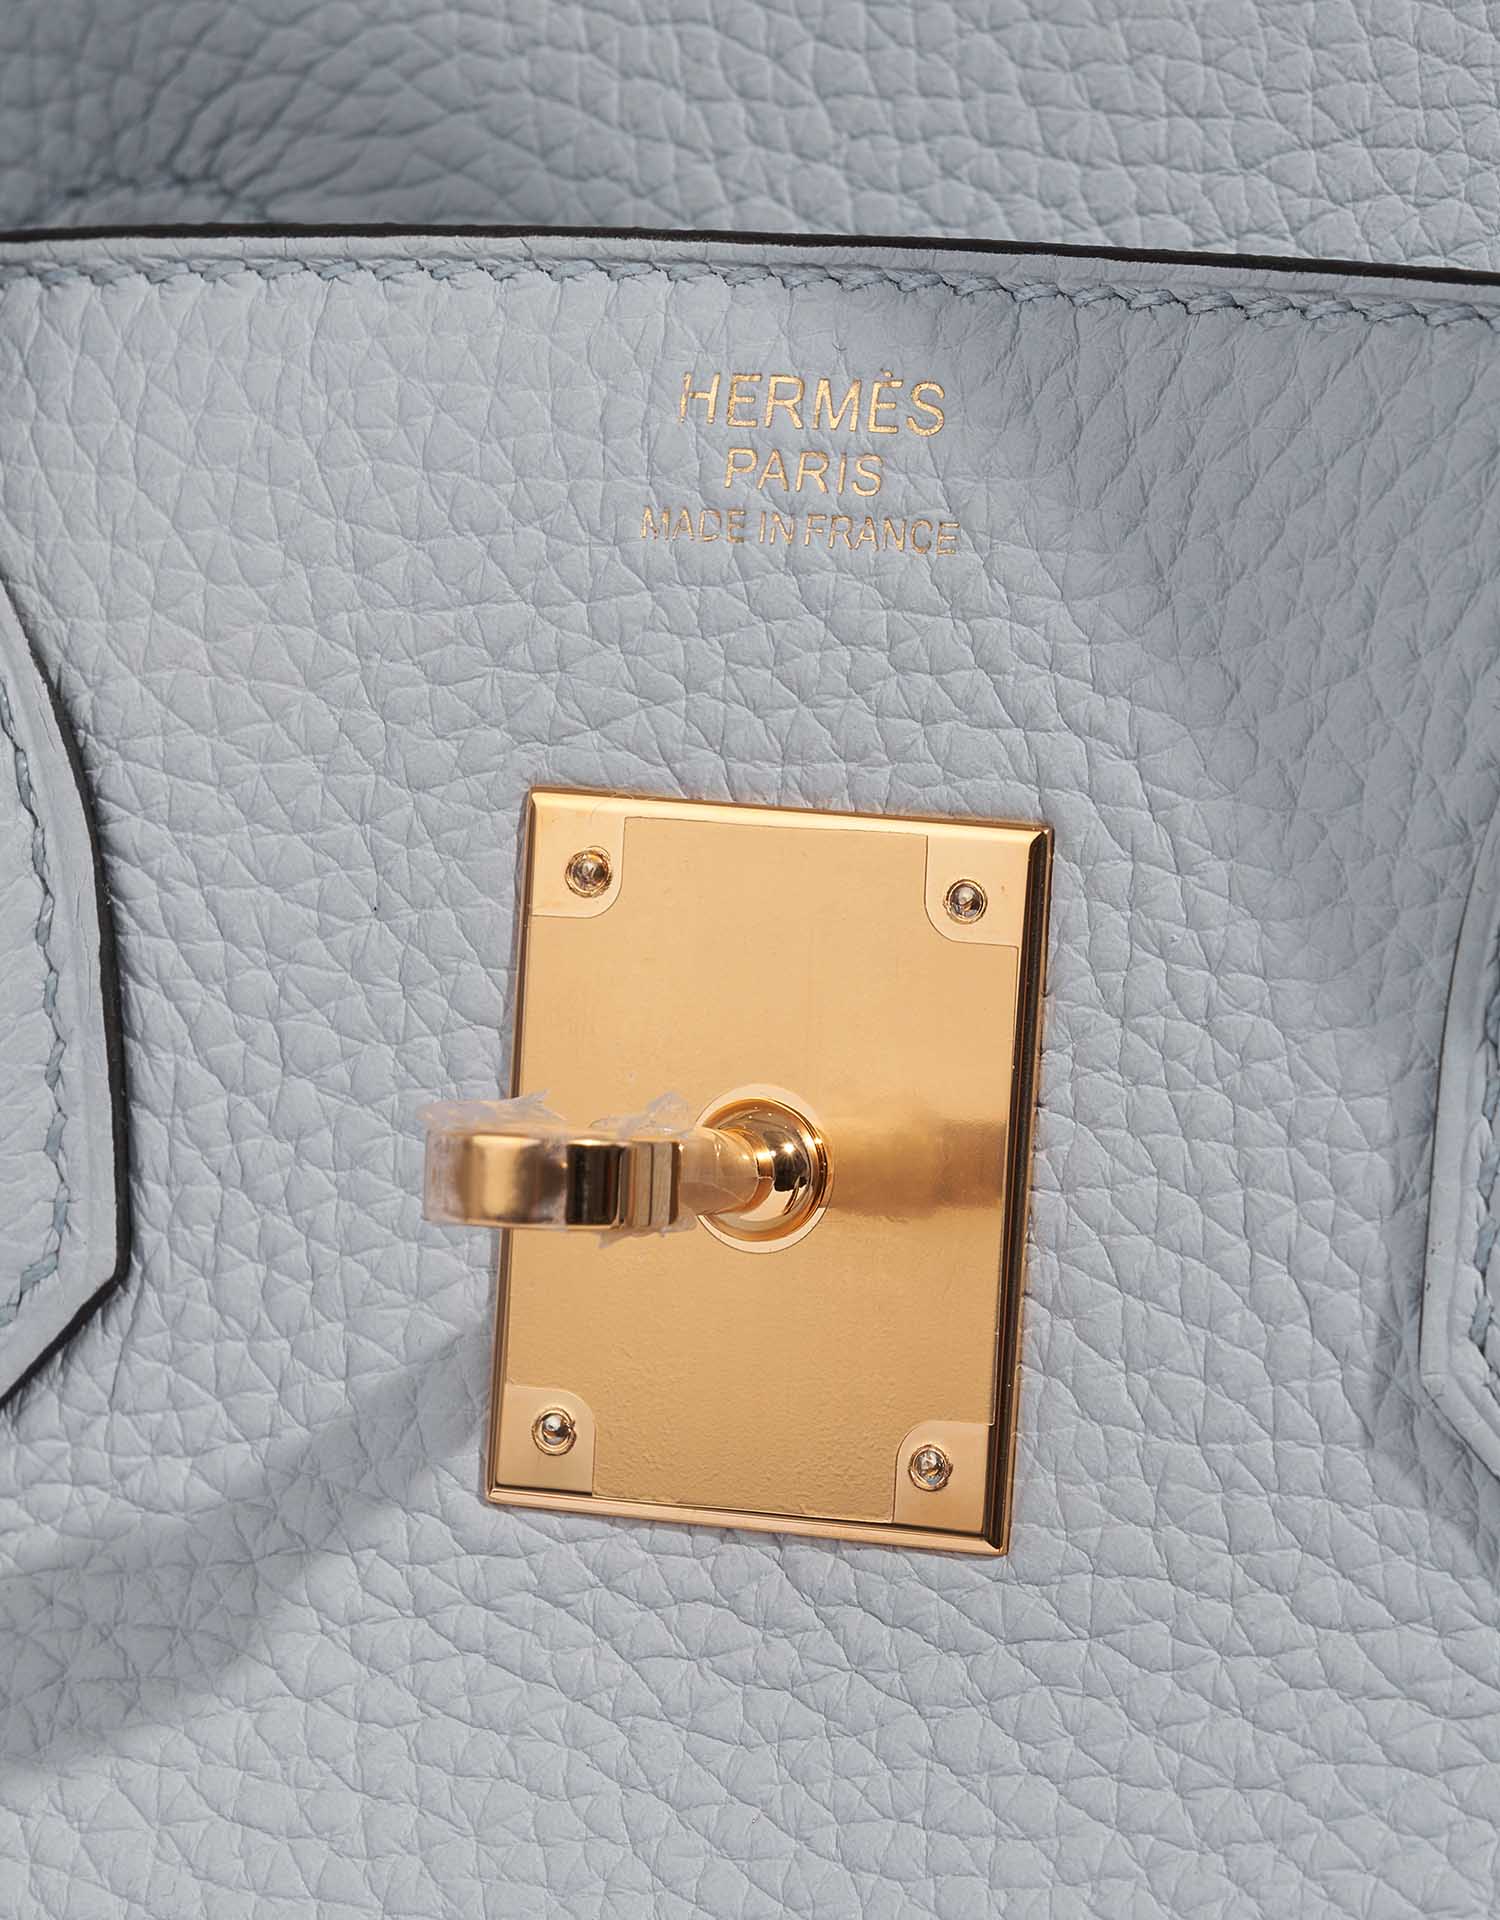 Hermes Birkin 30 in Gris Pale with Perle and Mykonos Blue Stripes -  Selectionne PH